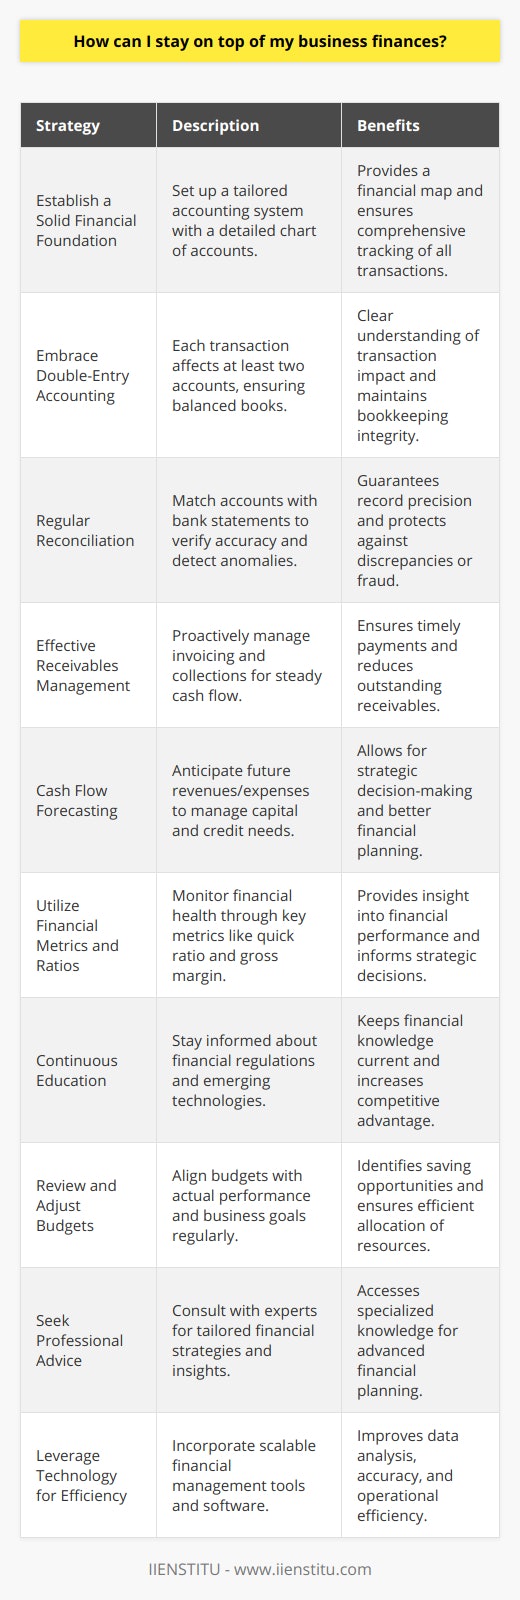 Managing business finances effectively is crucial for the growth and sustainability of any enterprise. Here are concise and insightful tips to help you stay on top of your business finances, providing rarely discussed strategies to help you maintain a clear financial picture.1. **Establish a Solid Financial Foundation**: Begin by setting up a robust accounting system tailored to your business needs. An often overlooked aspect is the importance of a chart of accounts, which is a comprehensive listing of every account in an accounting system, detailing assets, liabilities, equity, revenue, and expenses. This becomes your financial map.2. **Embrace Double-Entry Accounting**: Implement double-entry accounting — a method where each financial transaction affects at least two accounts. For instance, if you earn revenue from a sale, this system records an increase in assets (cash or receivables) and an increase in equity (sales). This practice provides a clear understanding of how transactions impact your business and aids in maintaining balanced books.3. **Regular Reconciliation**: Regularly reconcile your accounts with bank statements. This not only ensures accuracy in your financial records but also helps in identifying any unusual activity early on, such as discrepancies or fraudulent transactions that could impact your financial standing.4. **Effective Receivables Management**: Staying on top of accounts receivable is paramount. Adopt a proactive approach to invoicing and collections. Generate invoices immediately after providing a service or delivering a product, and follow up on overdue payments to ensure a steady cash flow.5. **Cash Flow Forecasting**: Develop the habit of forecasting your cash flow. By projecting future revenues and expenses, you can anticipate potential shortfalls and surpluses, and make more informed business decisions, such as timing capital expenditures or identifying the need for a business line of credit before it becomes a critical issue.6. **Utilize Financial Metrics and Ratios**: Master financial metrics and ratios, such as the quick ratio, current ratio, debt-to-equity ratio, and gross margin. These figures provide invaluable insights into the financial health of your business and are often bypassed in mainstream financial management discussions.7. **Continuous Education**: Engage in continuous financial education. Institutions like IIENSTITU offer specialized courses that can enhance your financial literacy. Understanding new financial regulations, tax obligations, and emerging accounting technology gives you an edge in managing your finances effectively.8. **Review and Adjust Budgets**: Treat your budget as a living document. Regularly review and adjust your budgets to reflect the actual financial performance and future objectives of your business. This adaptive approach can reveal opportunities for cost savings and pinpoint areas that are over or underfunded.9. **Seek Professional Advice**: Sometimes, rare insights come from experienced professionals. Don’t hesitate to consult with a financial advisor or accountant who can offer personalized advice and strategies for financial management that are less commonly known or specific to your industry.10. **Leverage Technology for Efficiency**: Incorporate financial management software and tools for more efficient record-keeping and data analysis. While technology choices abound, consider the sustainability and scalability of the solutions you adopt. By employing these refined strategies, going beyond the basic tenets of business financial management, you can gain better control over your financial situation, identify opportunities for growth, and steer your business towards long-term success. Remember, consistency in these practices is key to staying on top of your business finances.